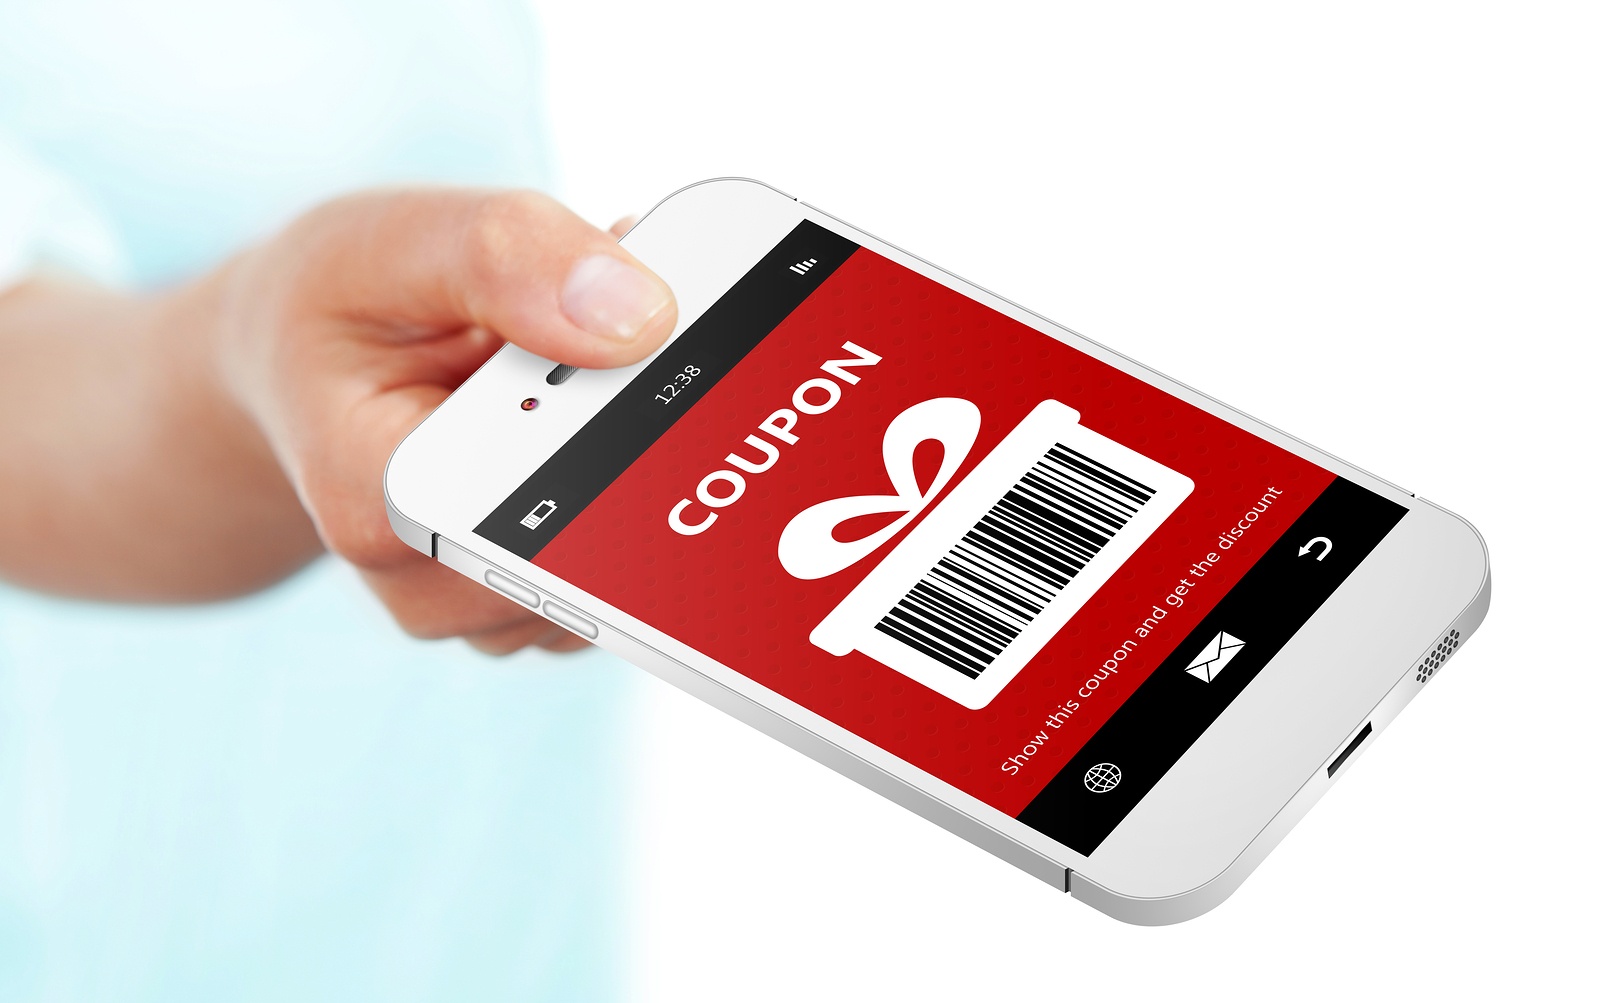 Mobile Coupons Lead To Lickety Split Action 65 Percent Redeem Them In 5 Minutes